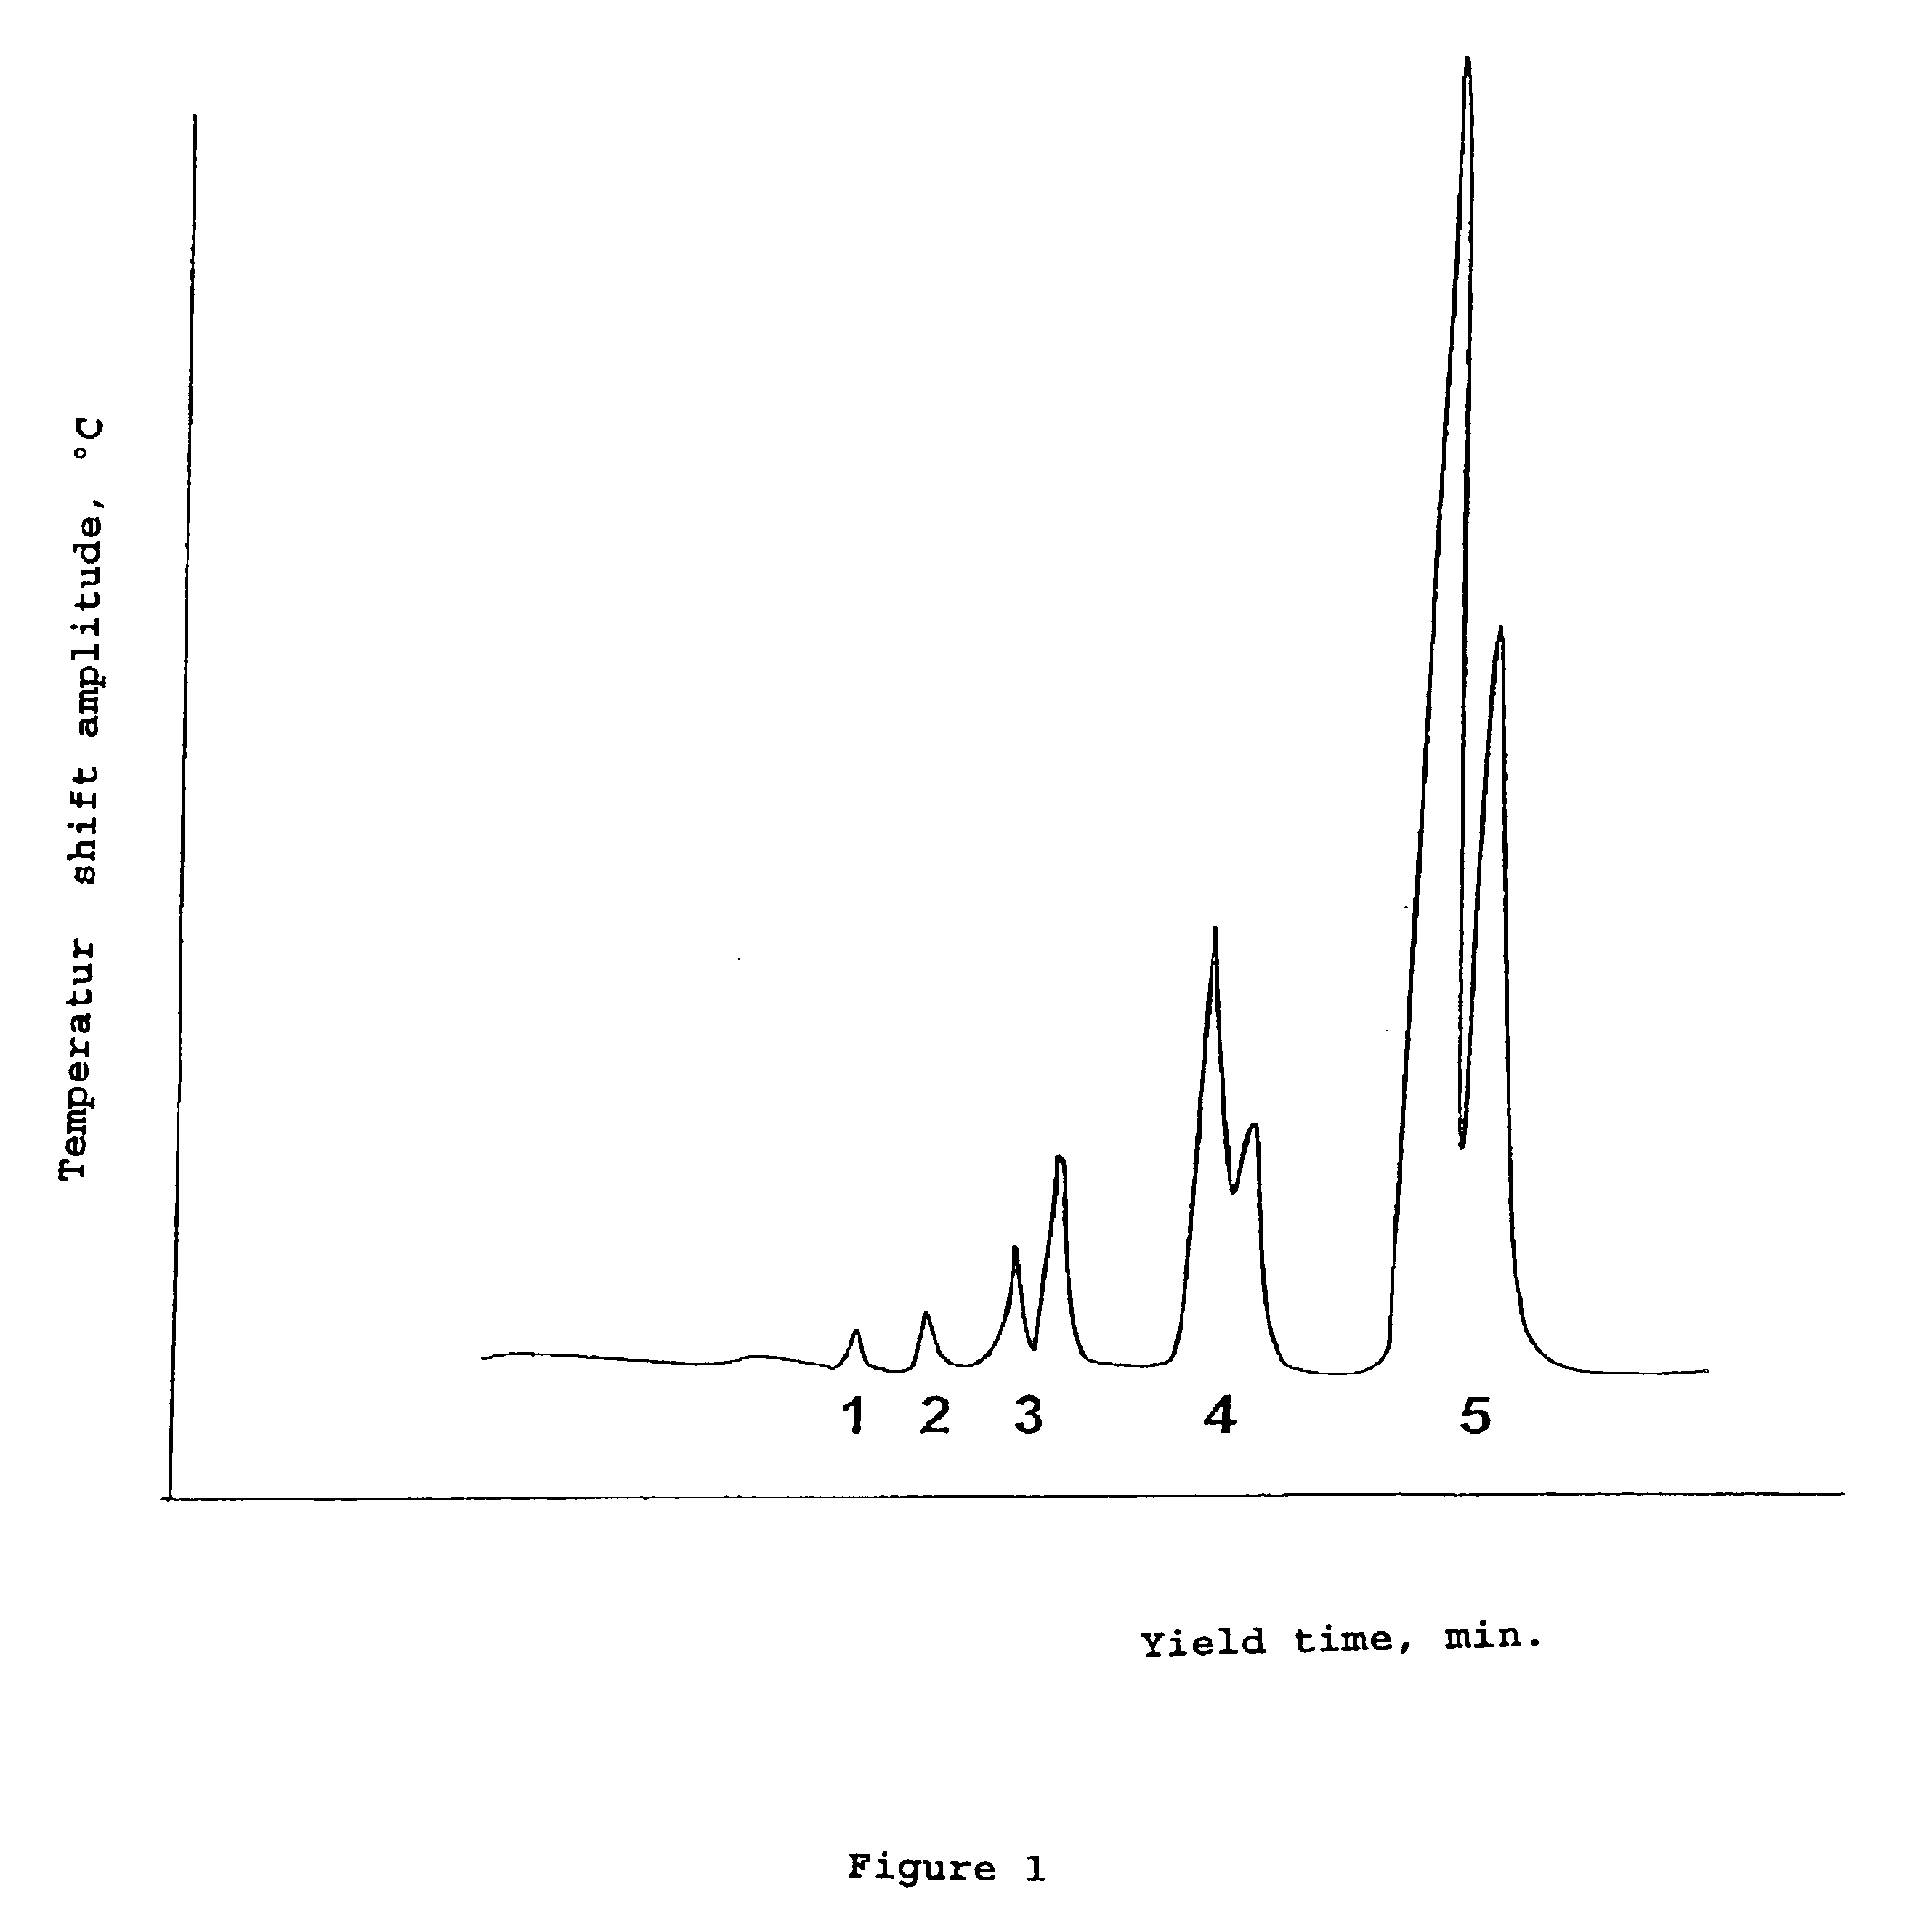 Perfluoronated cycle-containing tertiary amines used as a basis for gas-conveying emulsions and device for the production thereof